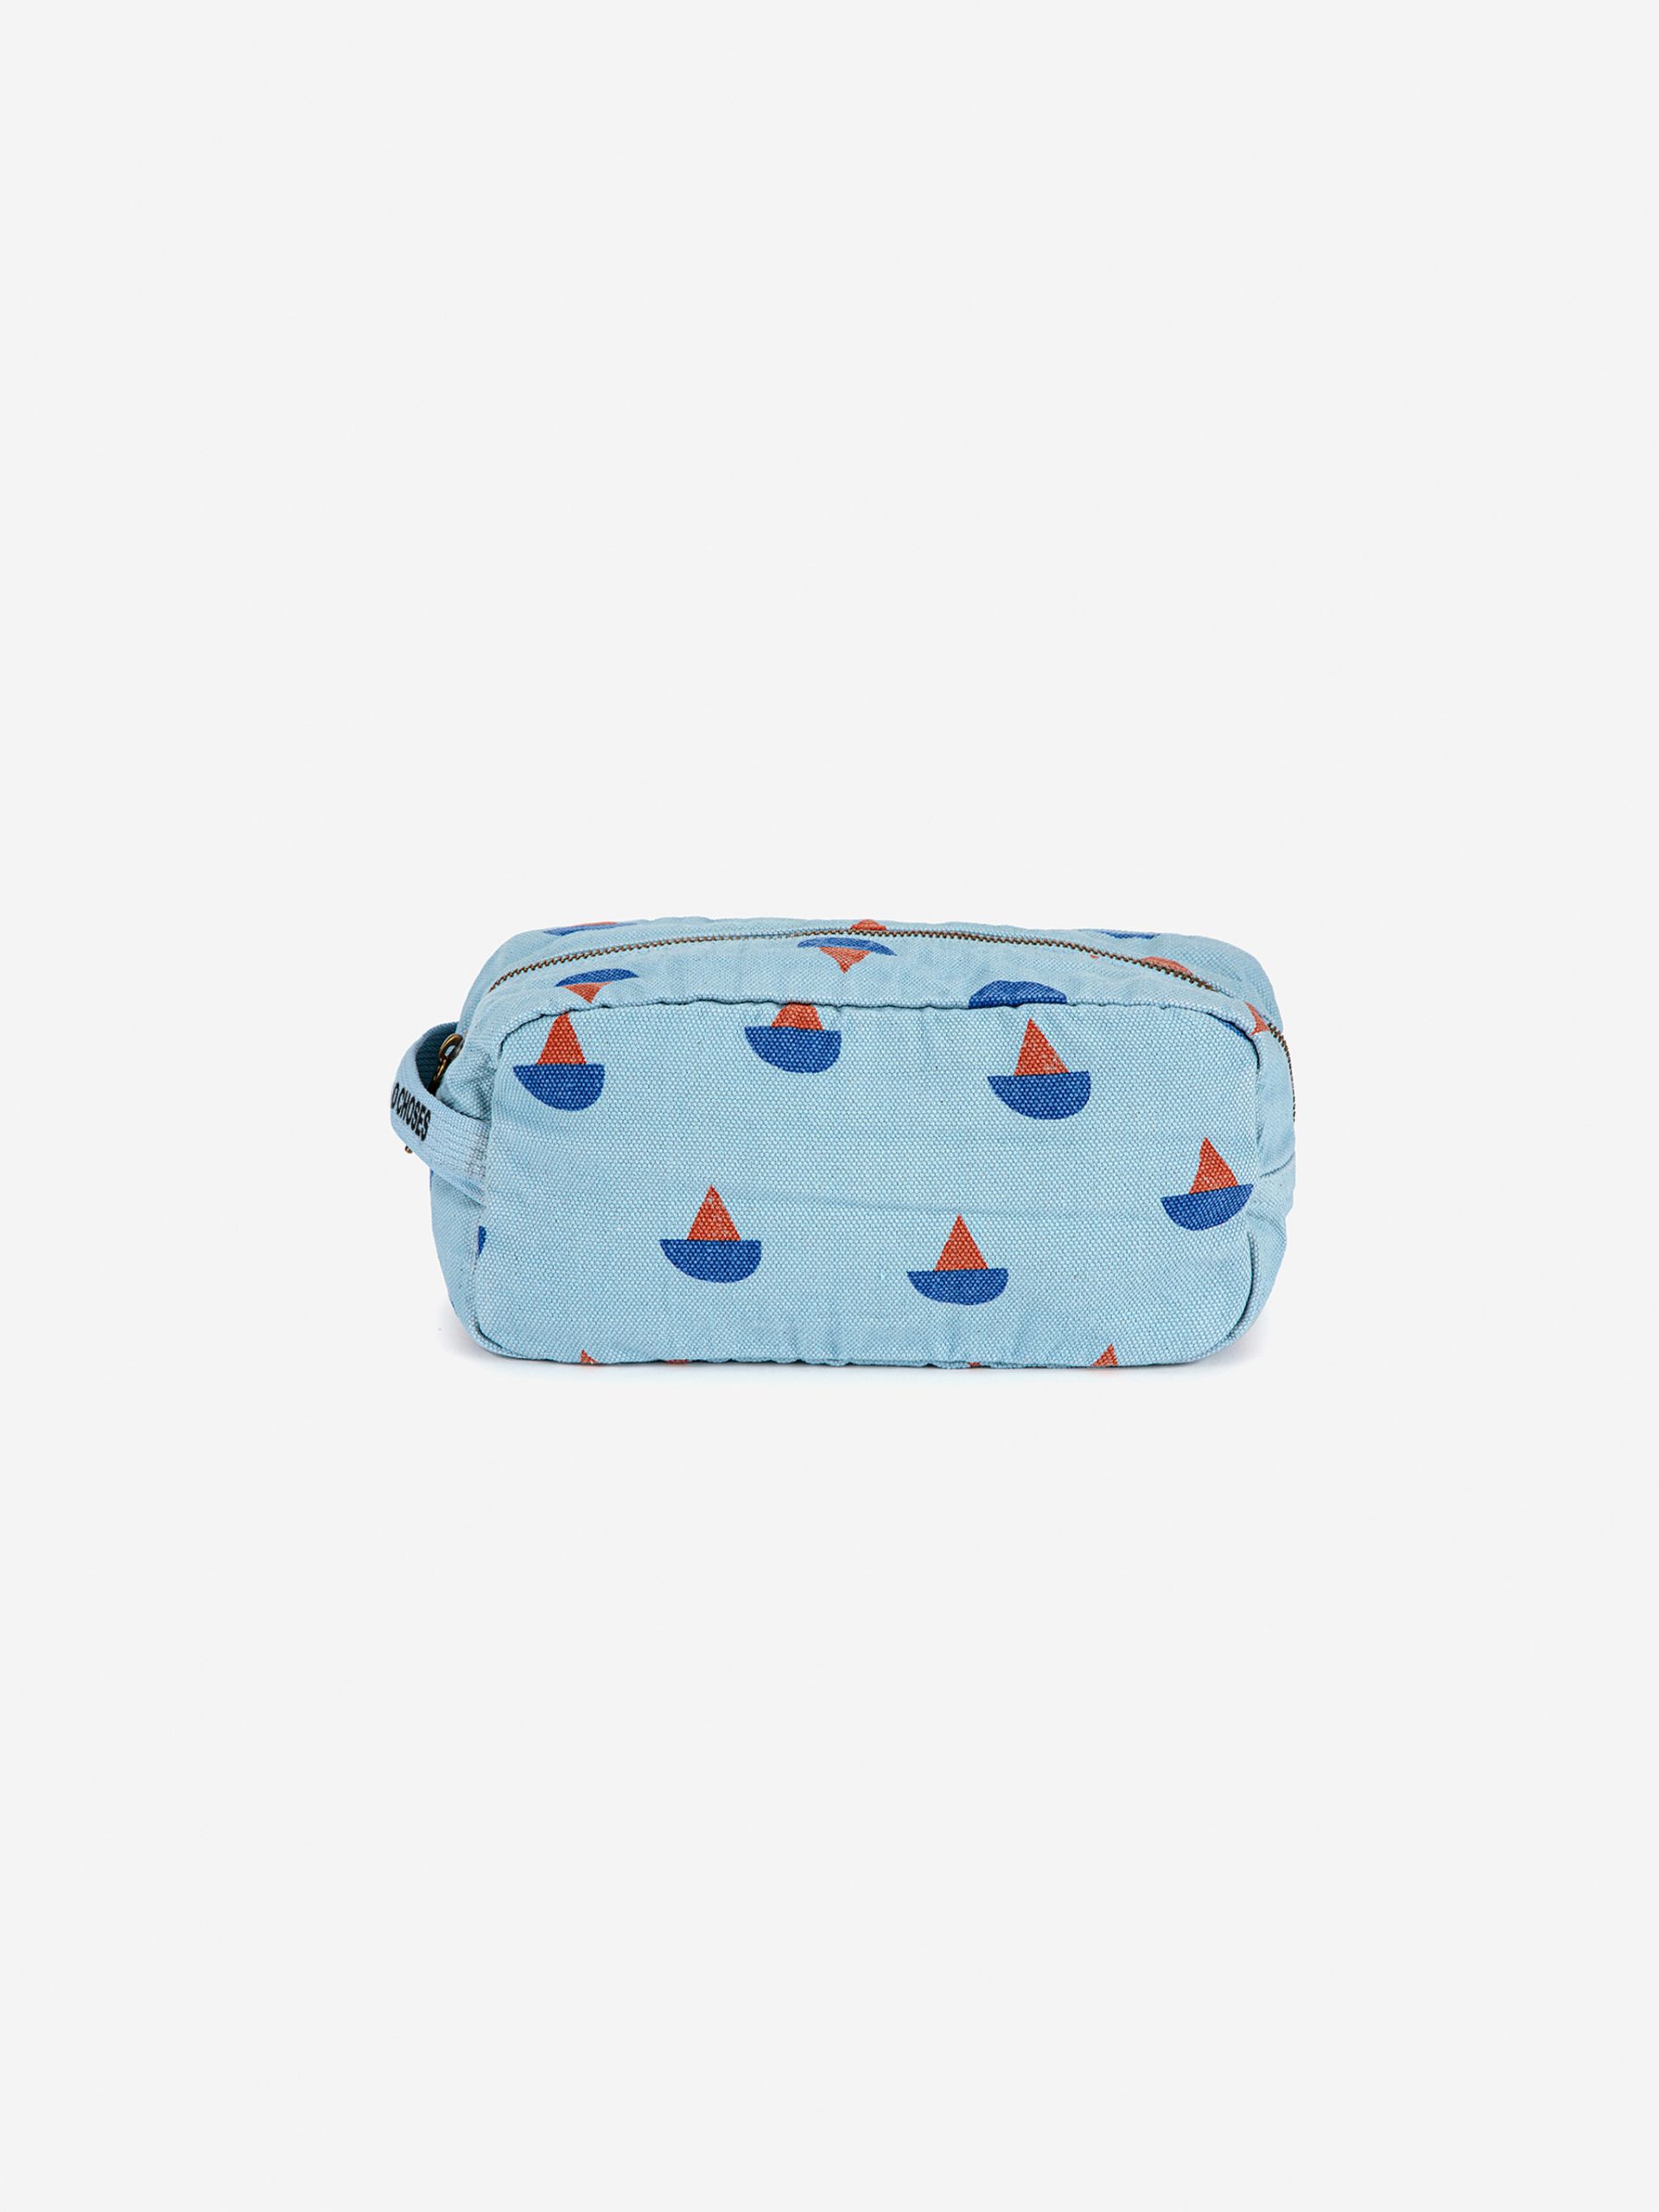 Bobo Choses Tasche 'Sail Boat All Over' 